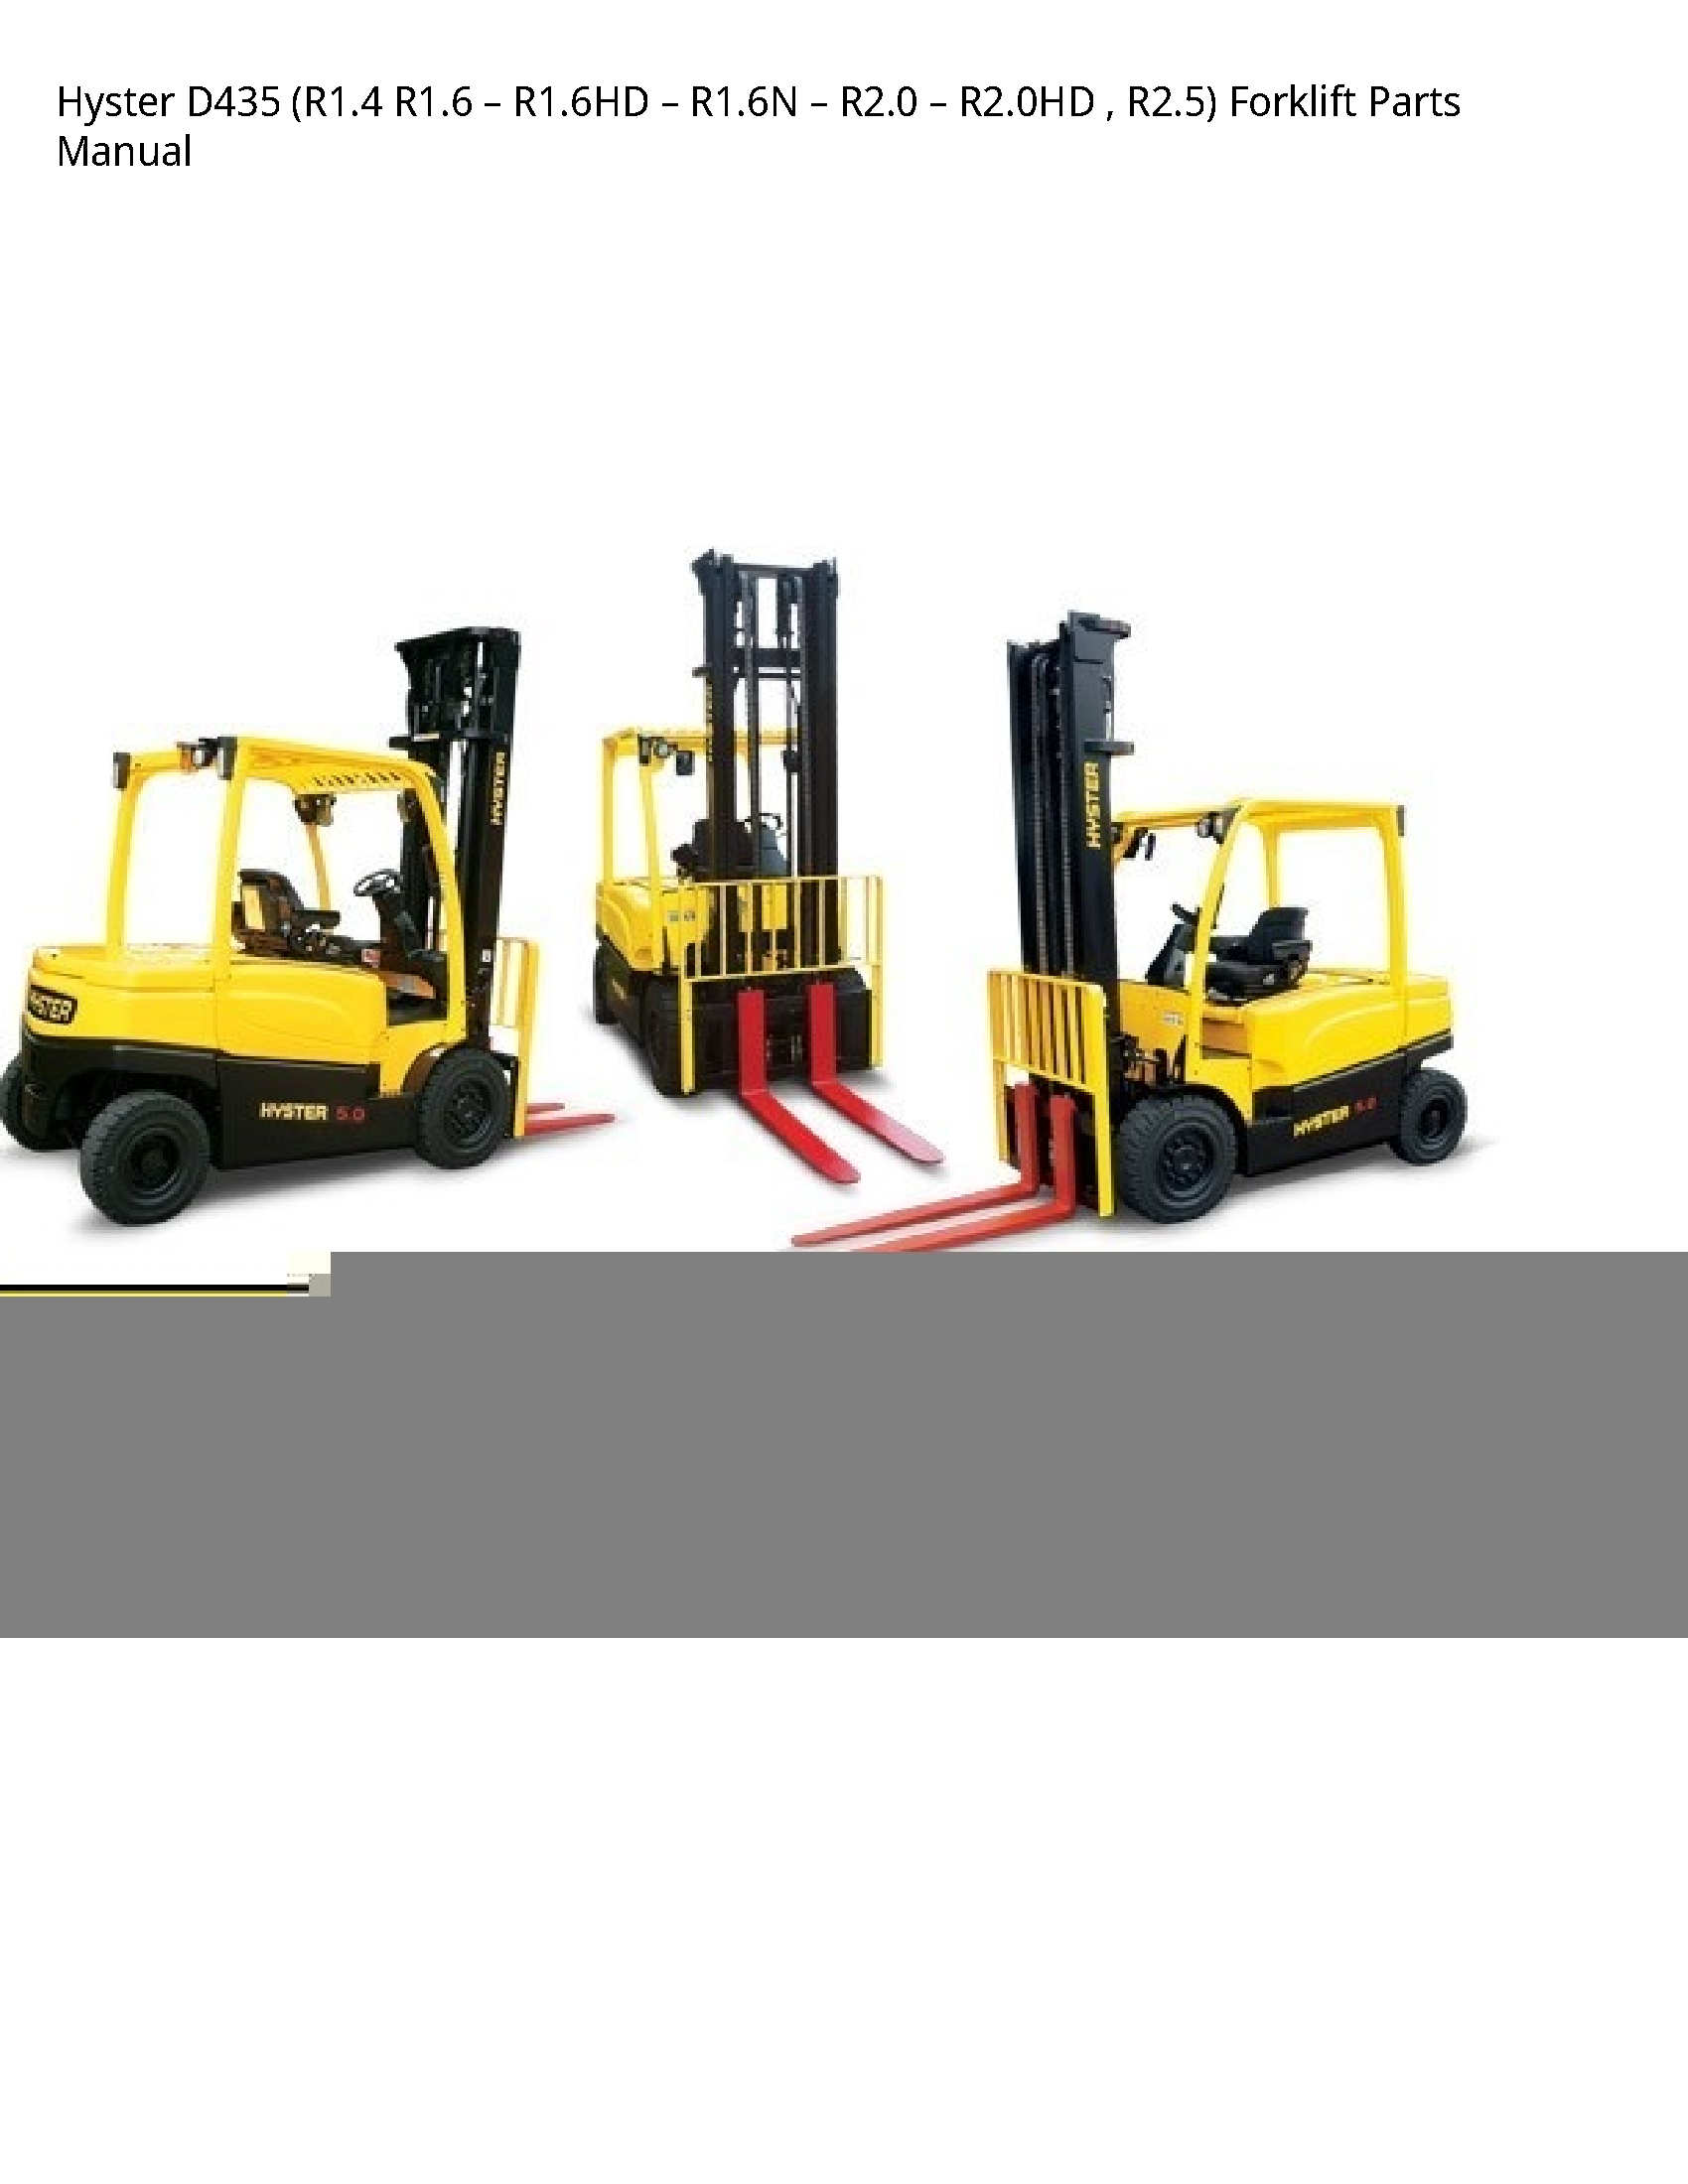 Hyster D435 Forklift Parts manual